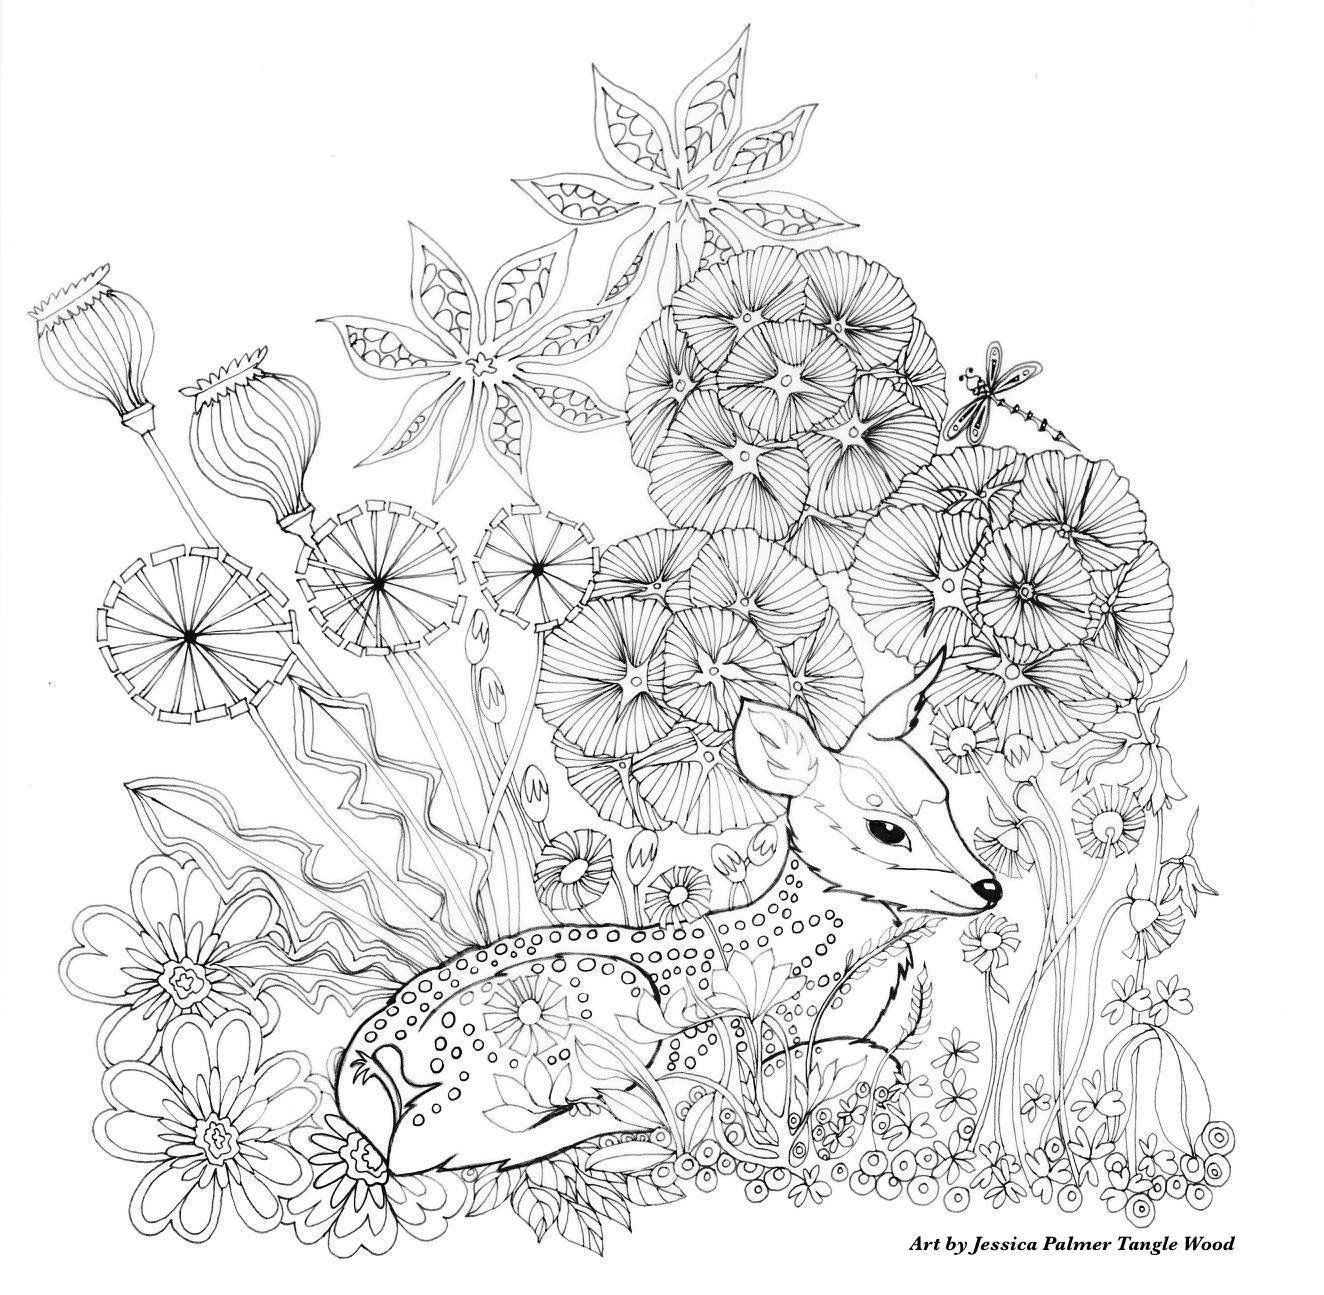 Deer Coloring Pages For Adults
 Deer resting in the flowers coloring page